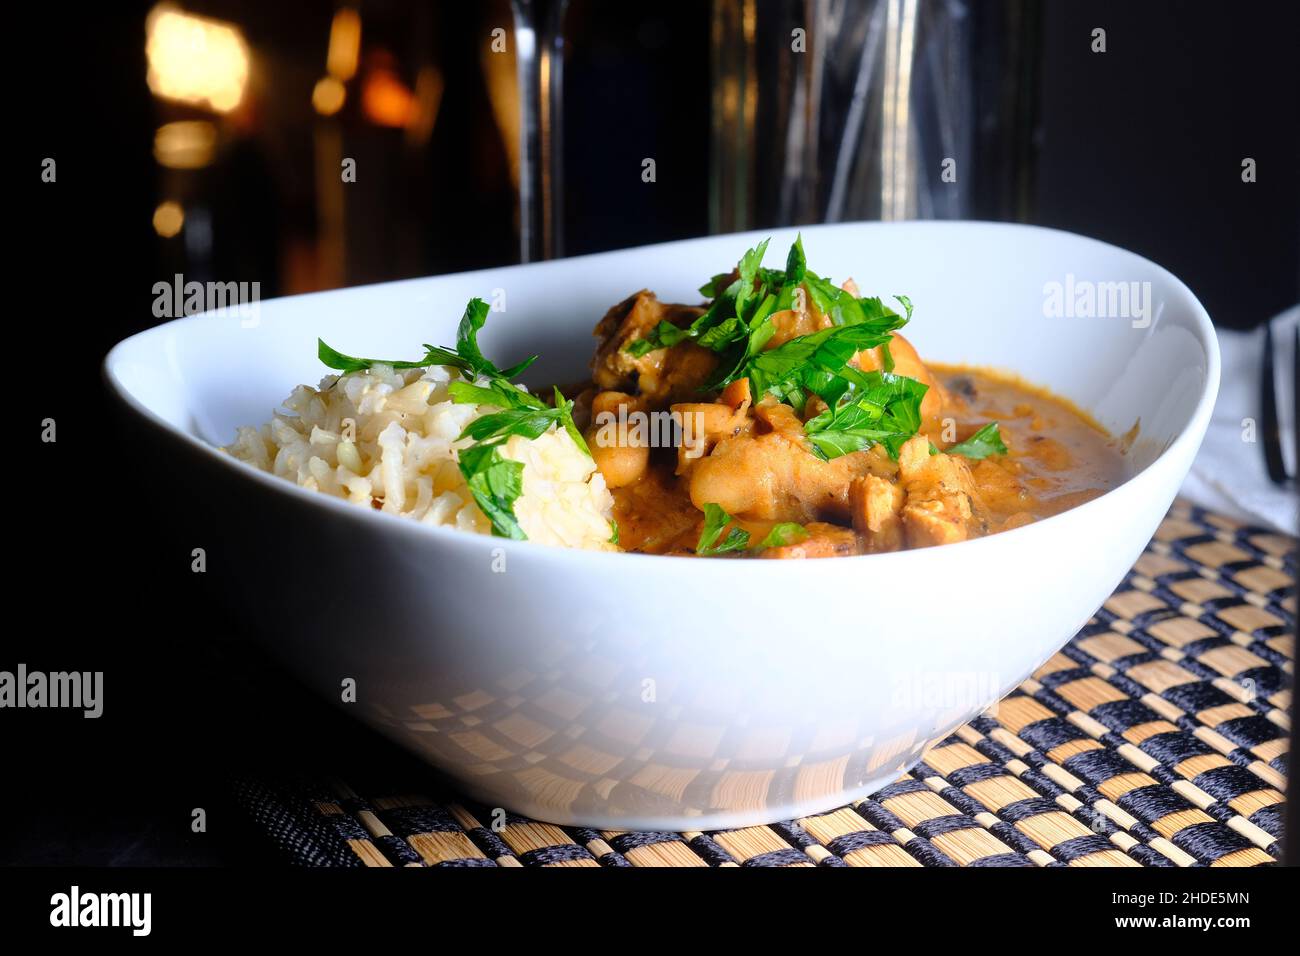 Hungarian chicken paprikash with brown rice and parsley garnish Stock Photo